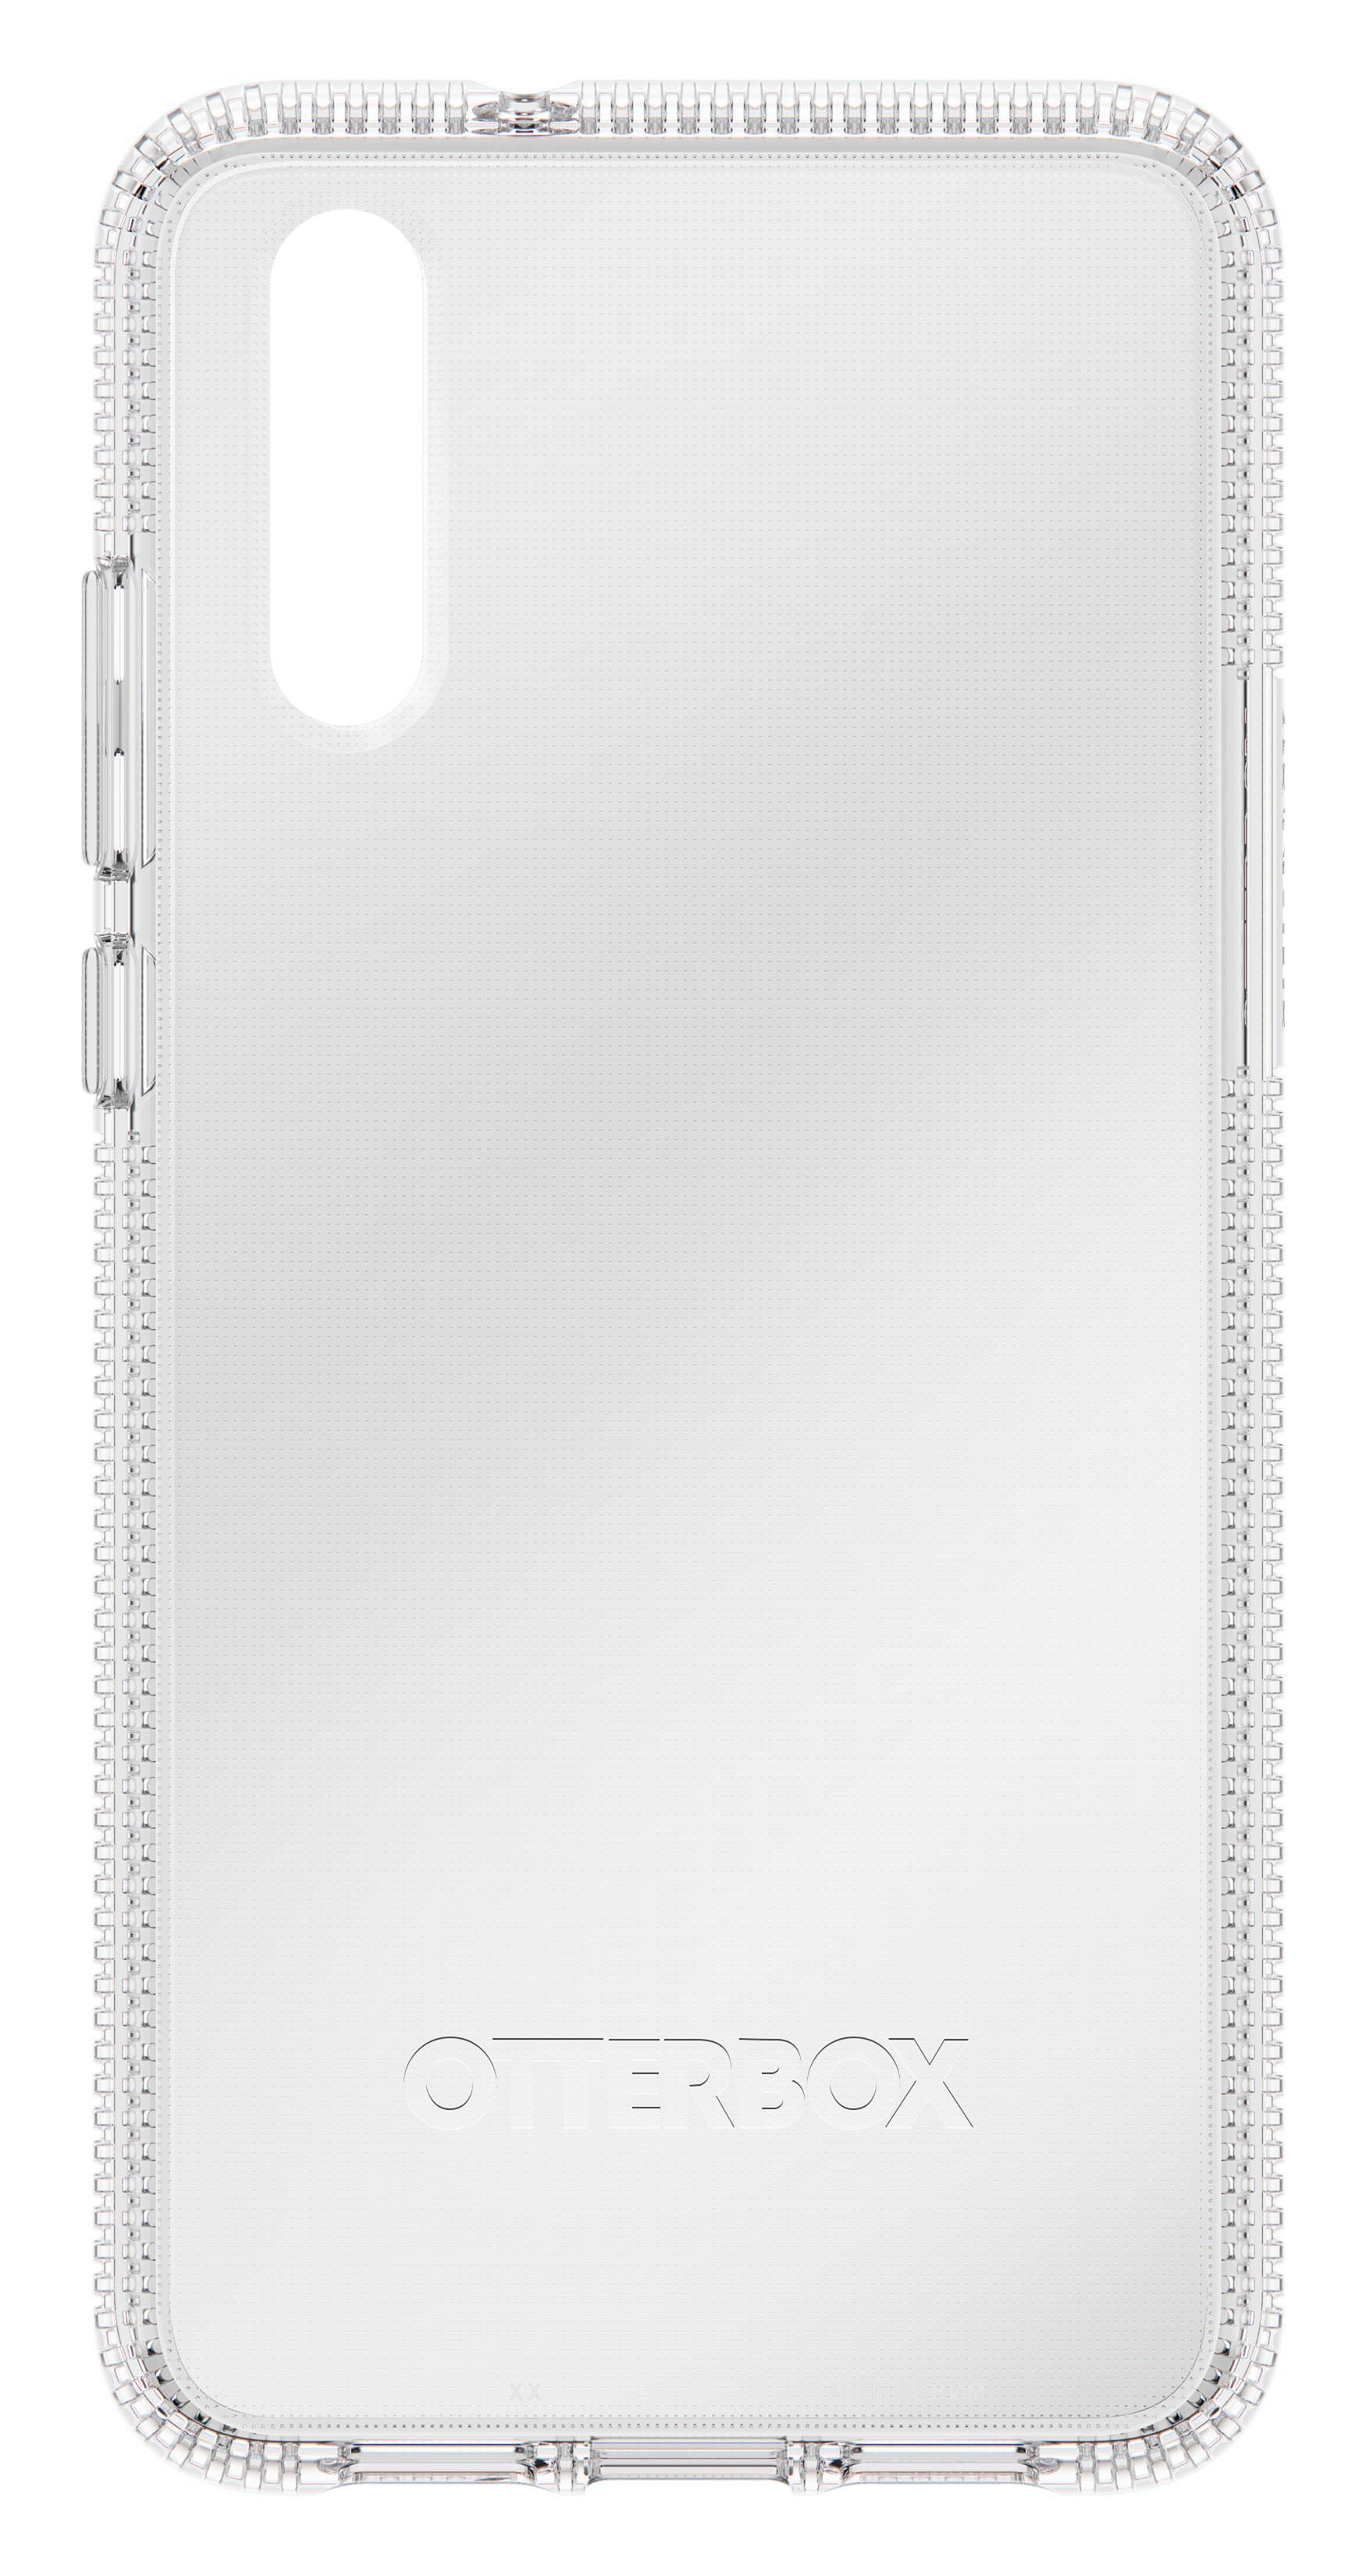 OTTERBOX Prefix Clear, Backcover, Huawei, P20, Transparent